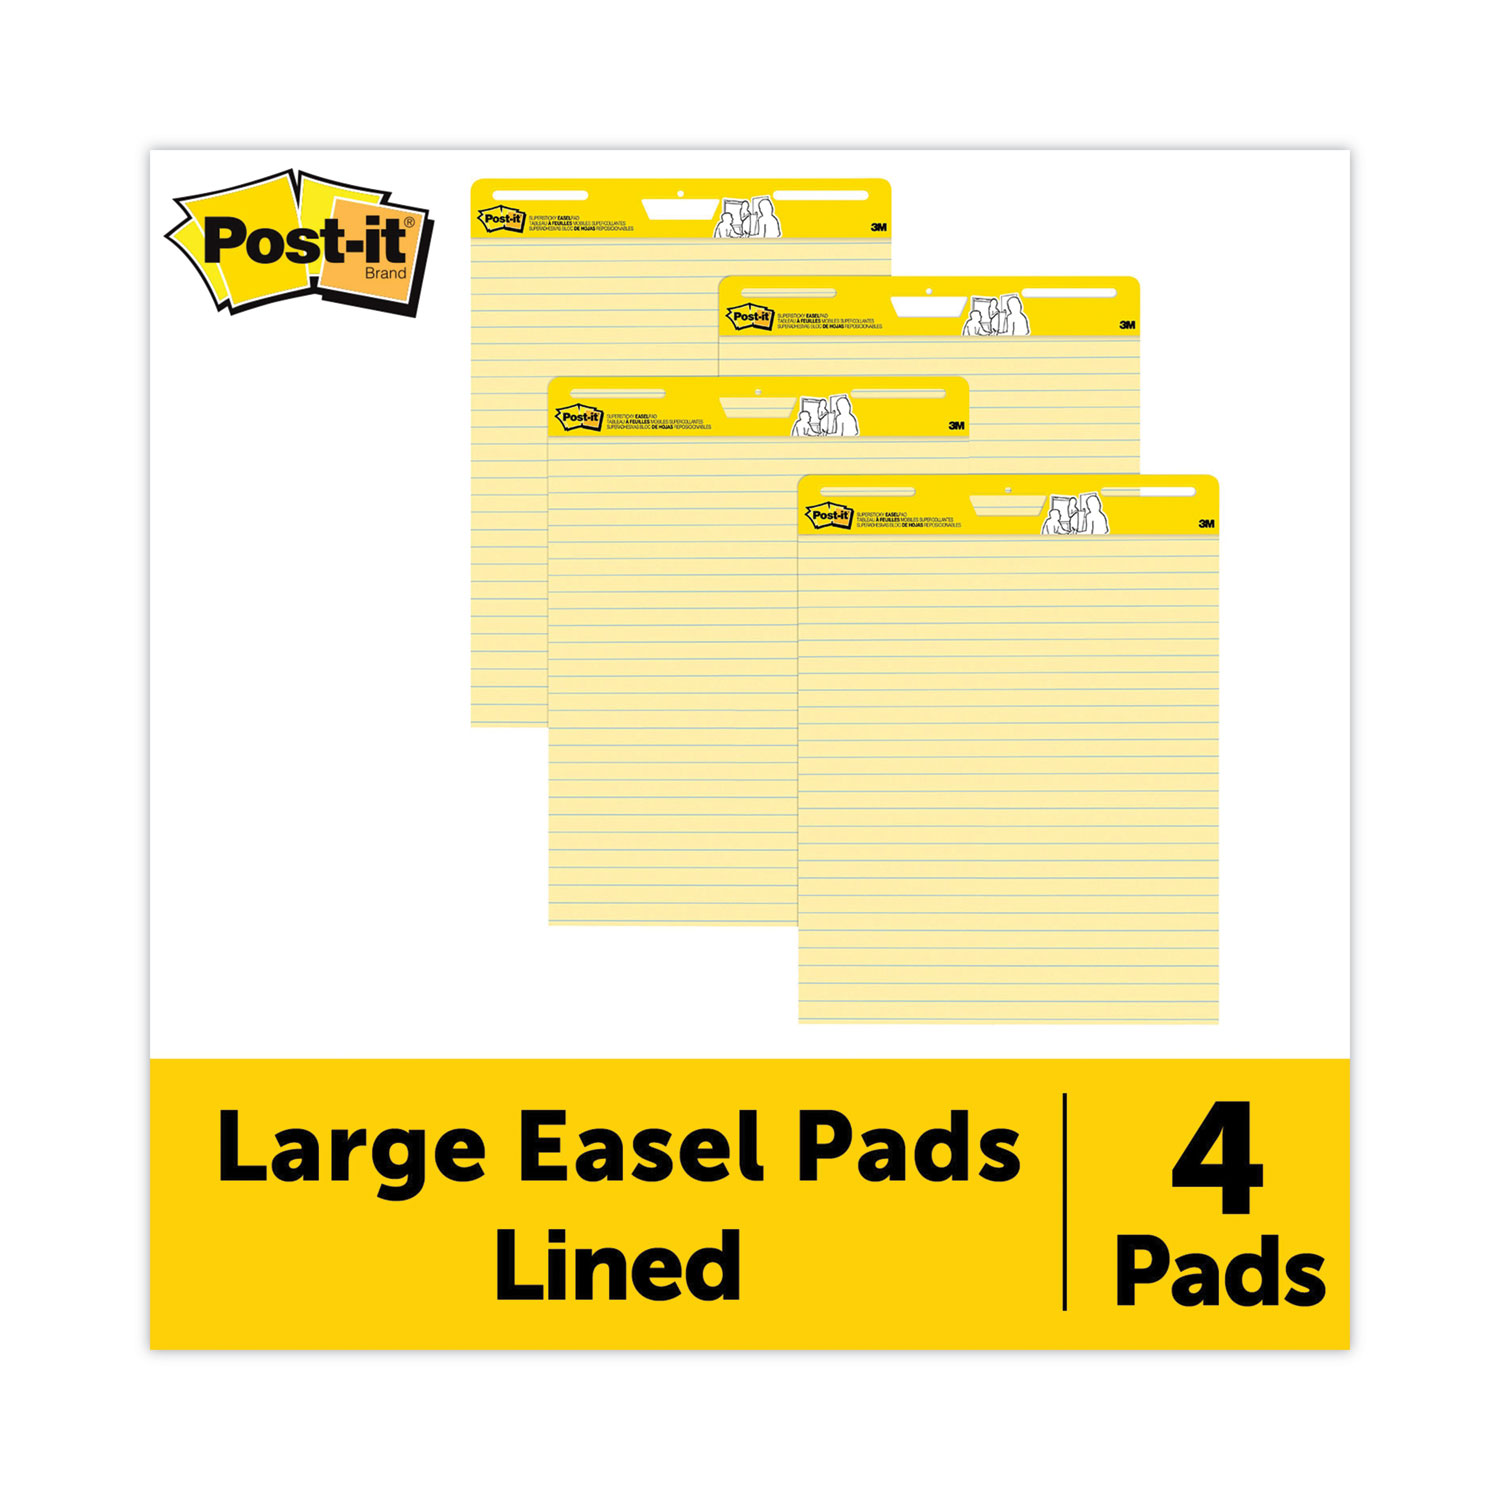 Format　Yellow,　Office　x　Pad　4/Carton　Rule),　Vertical-Orientation　30　Presentation　Self-Stick　Pack,　Value　Sheets,　Easel　Express　30,　(1.5